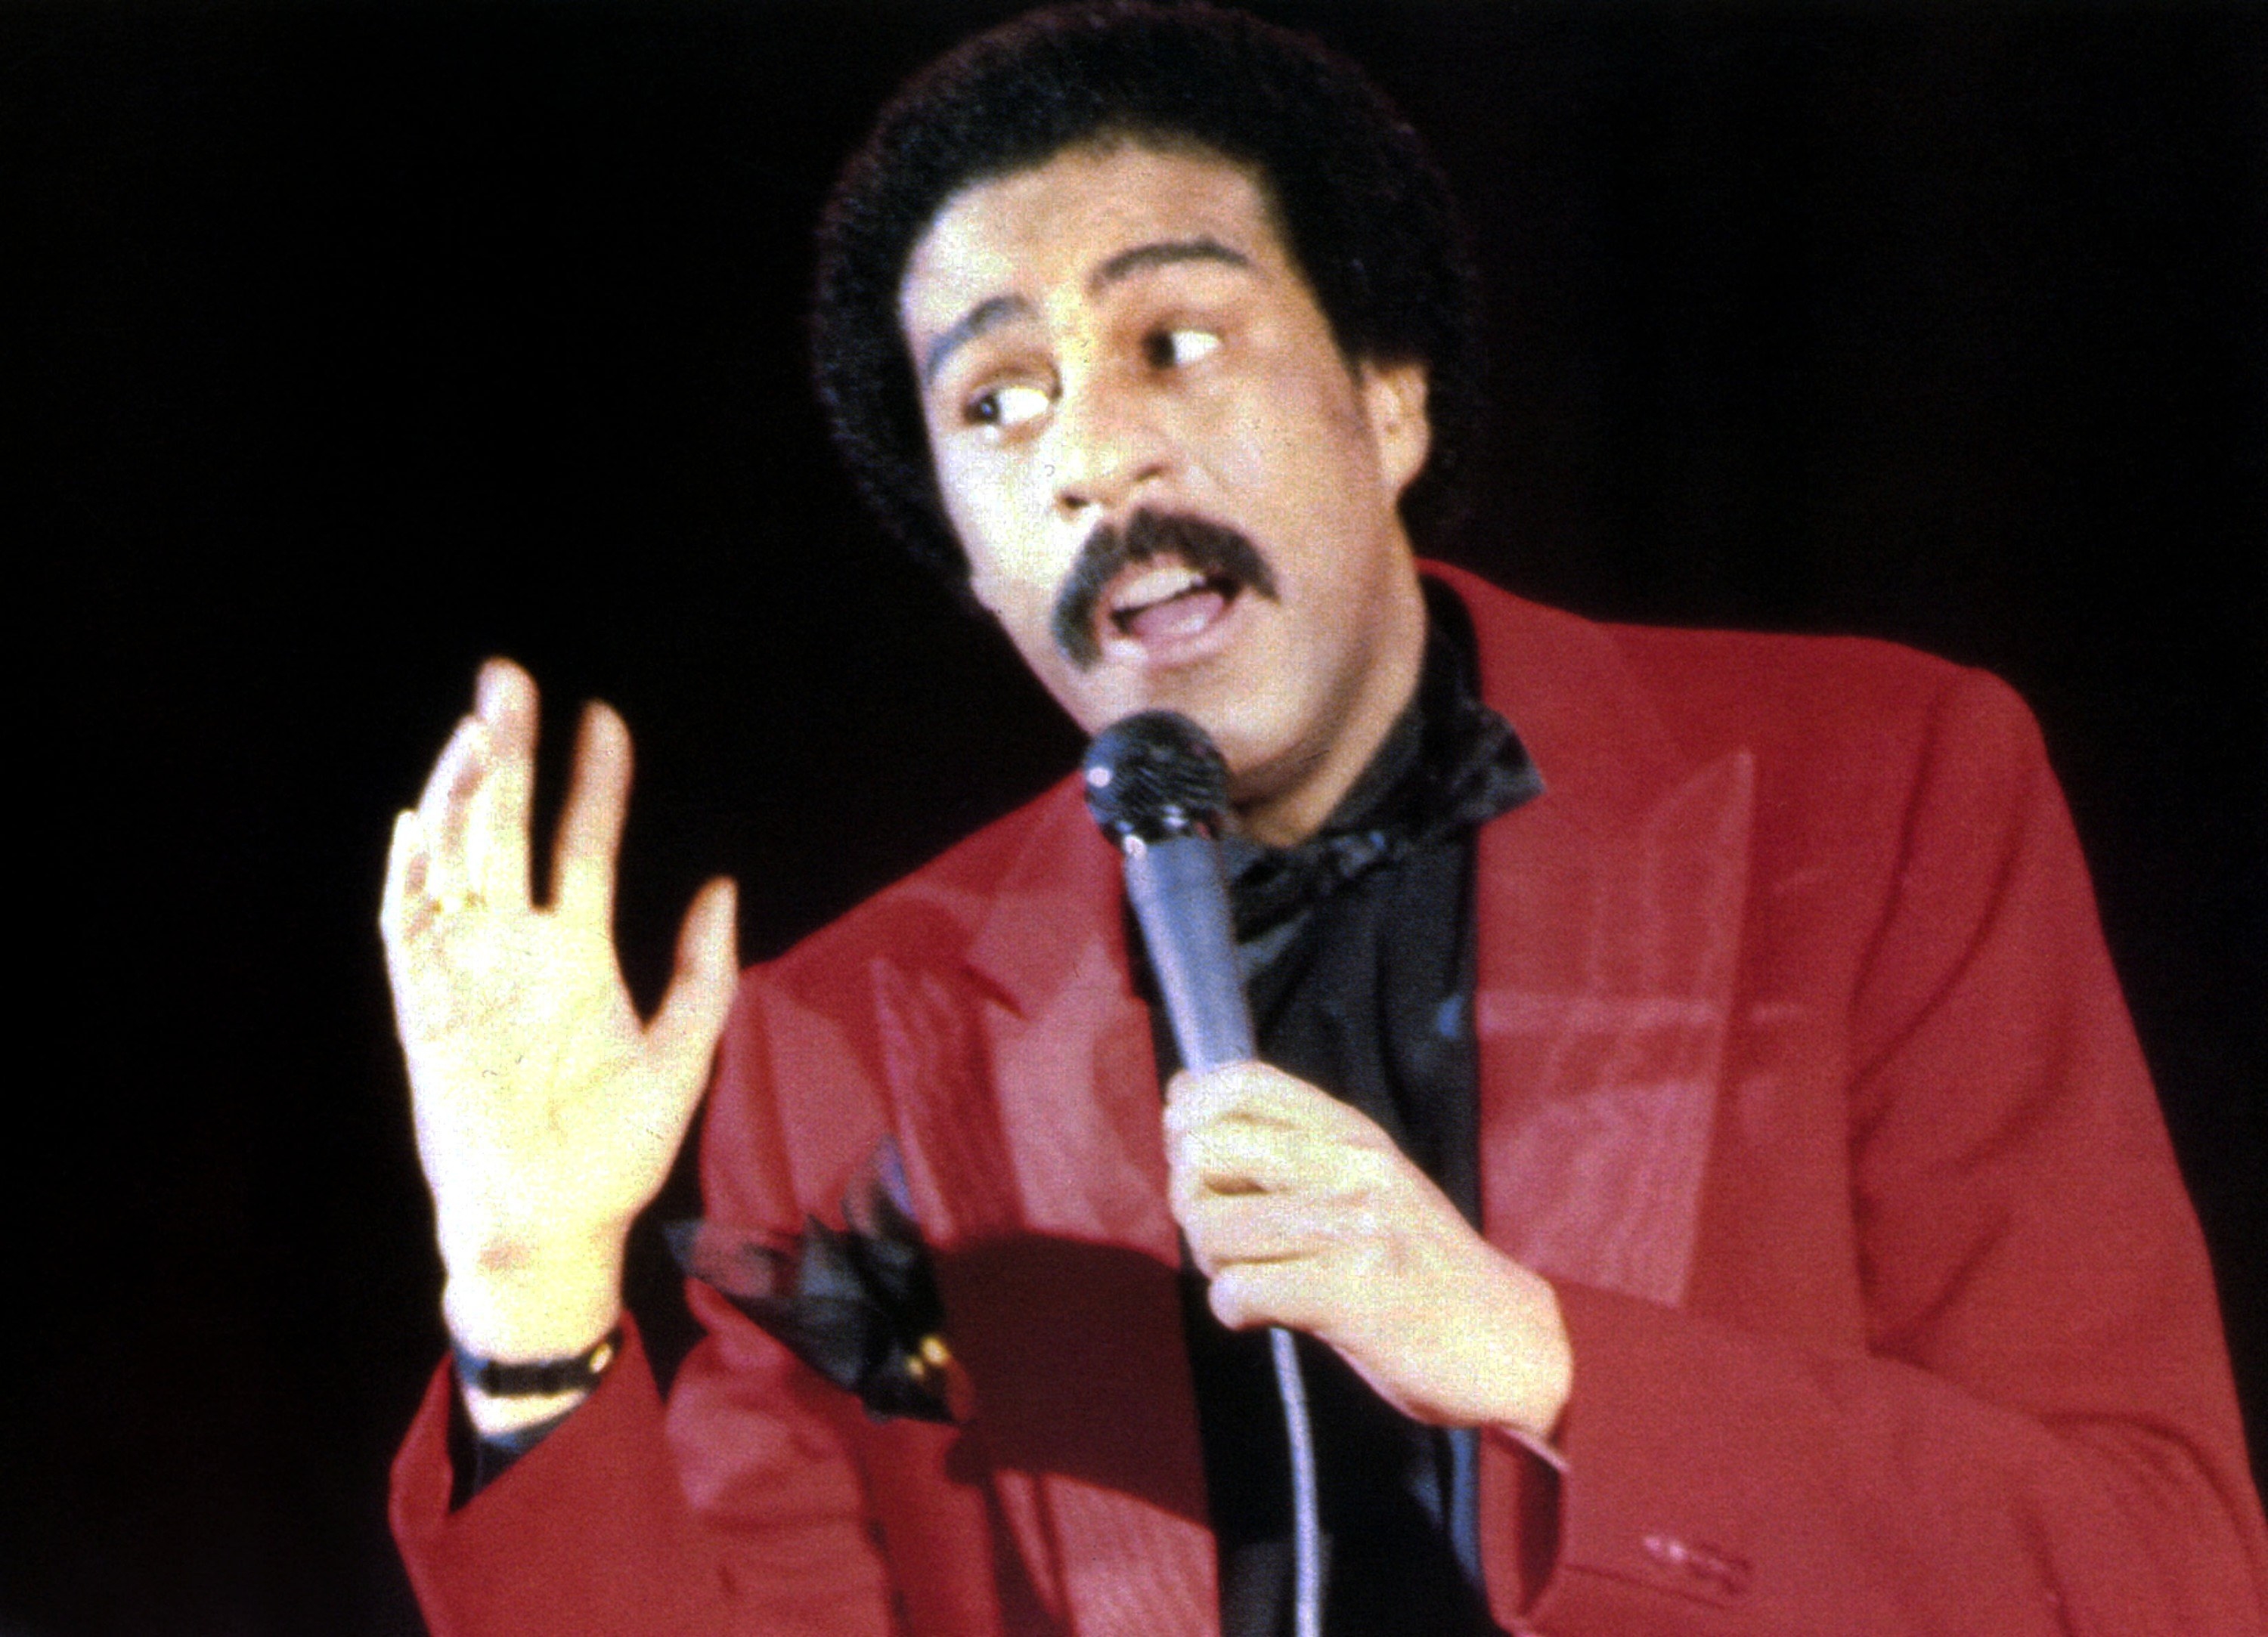 Richard Pryor performing in the early 80s